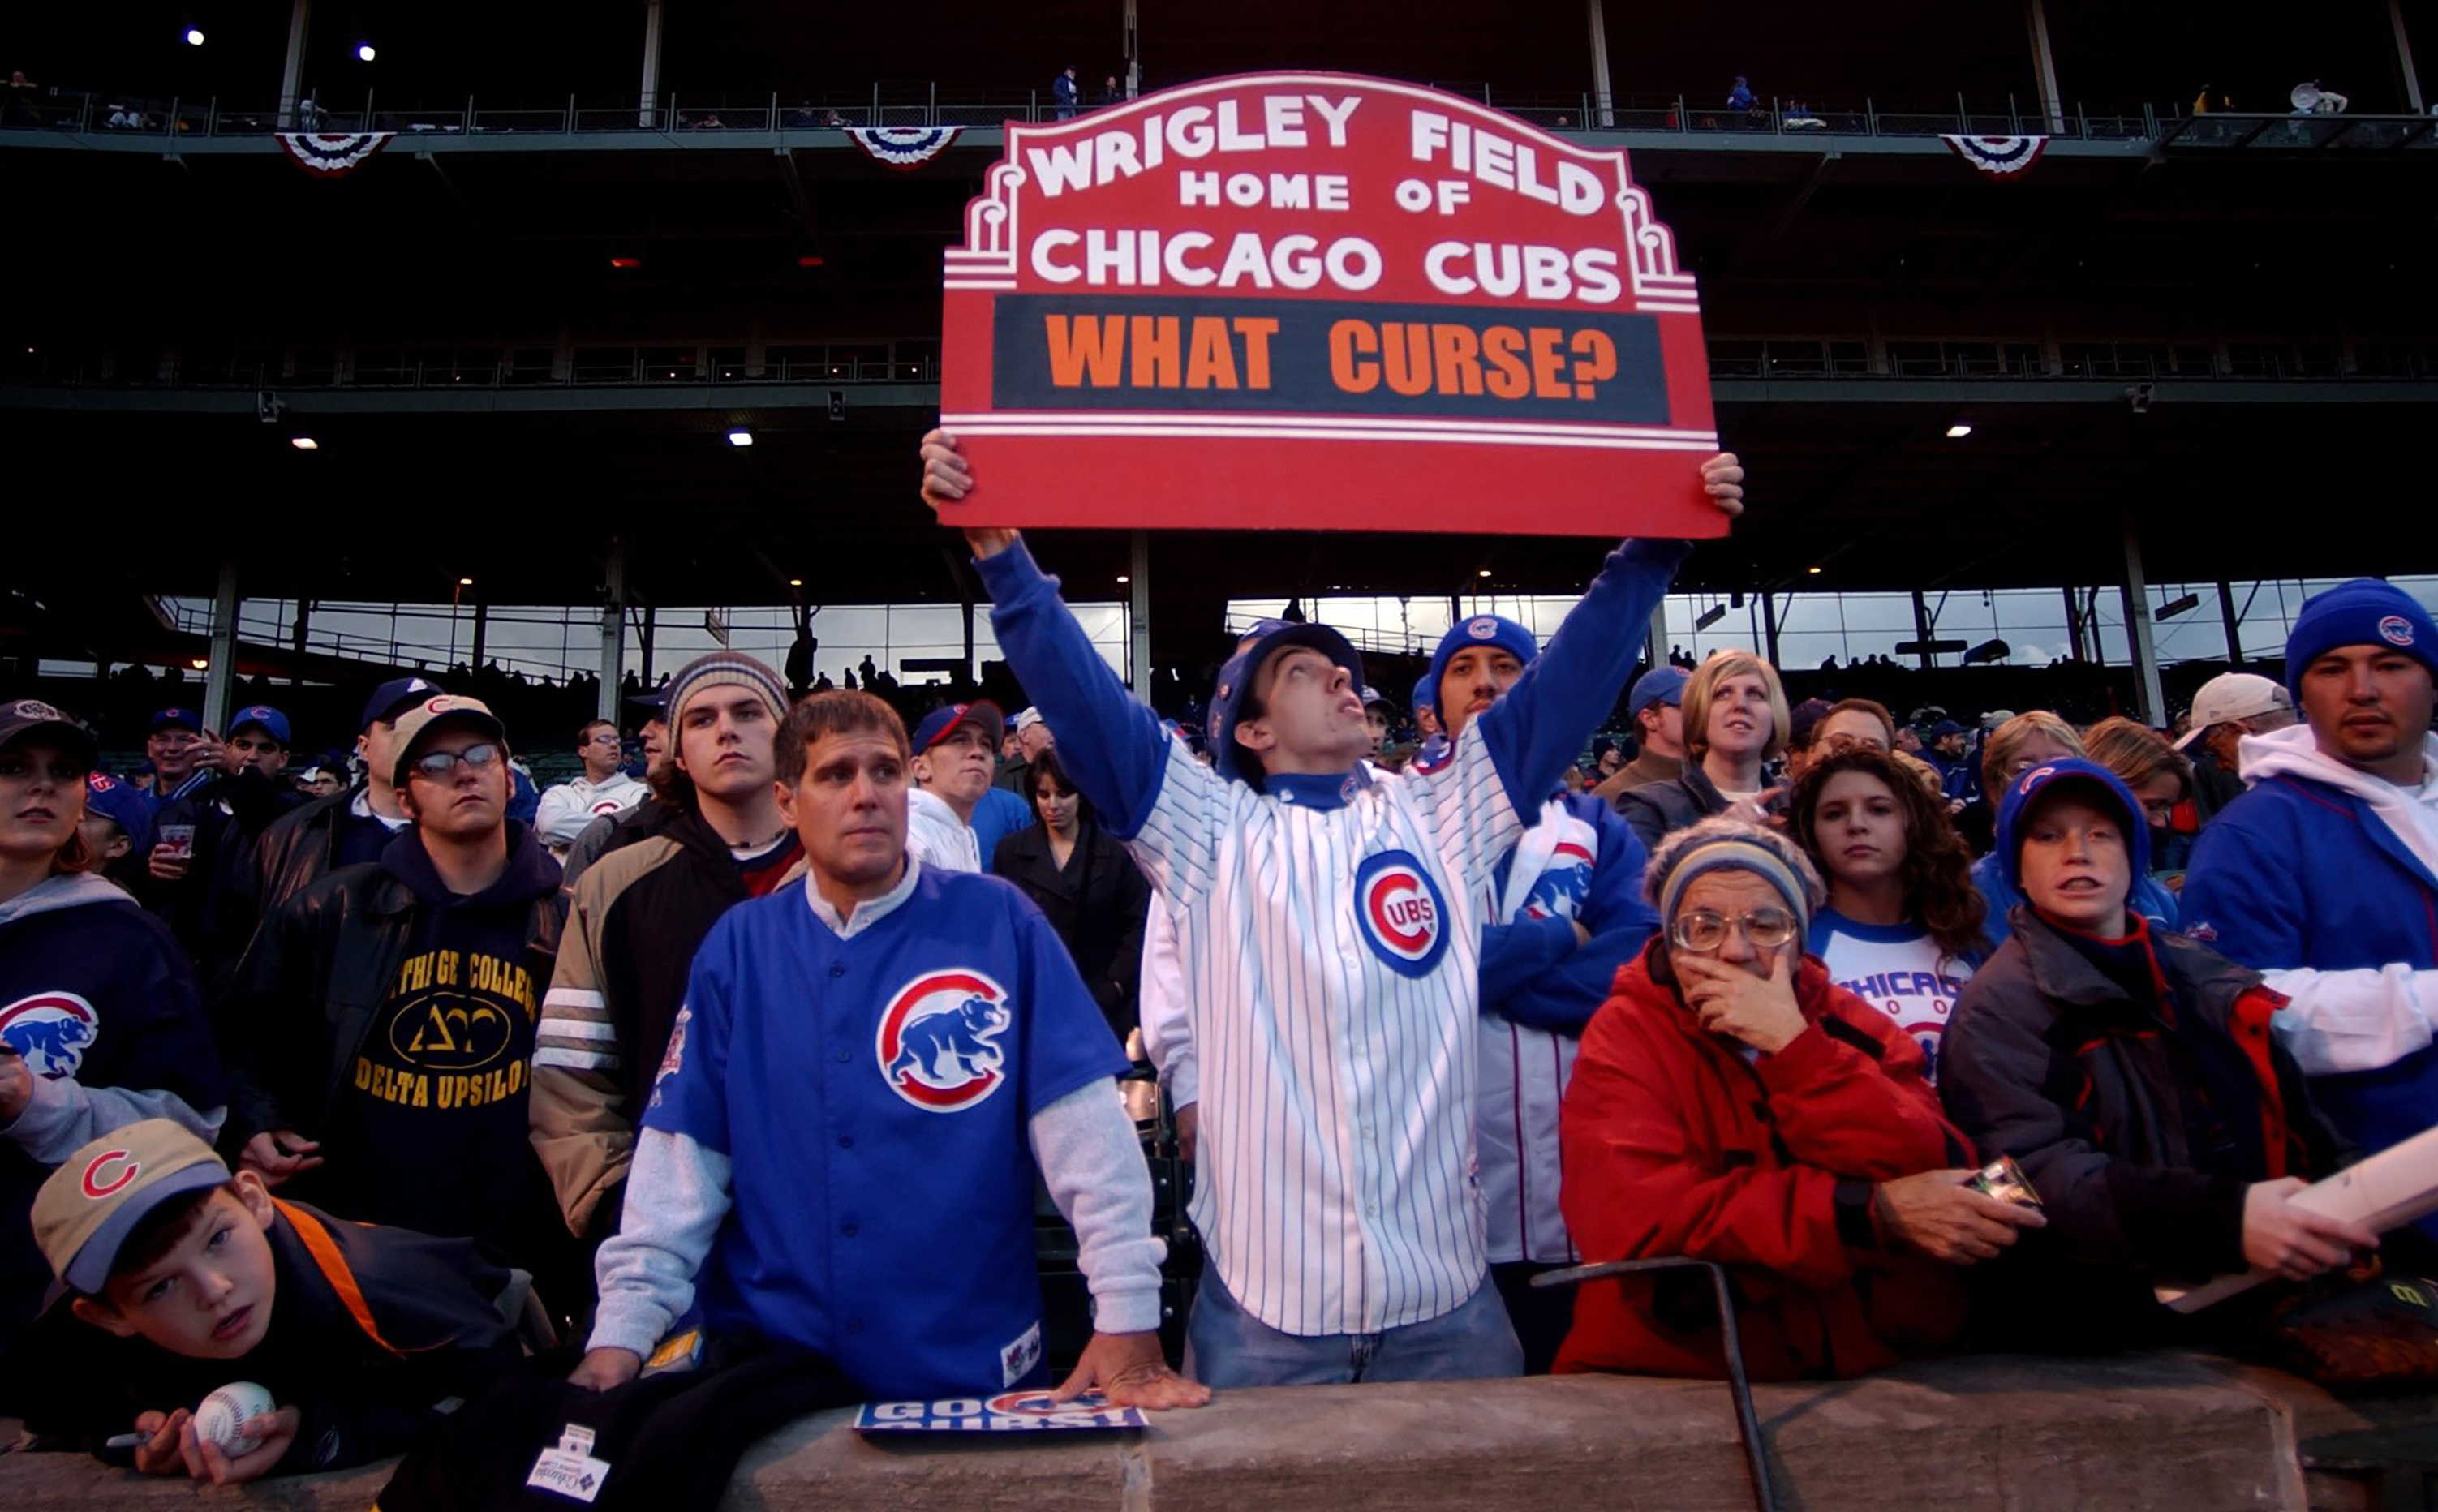 20 years after the Bartman game, Cubs fans can look back with